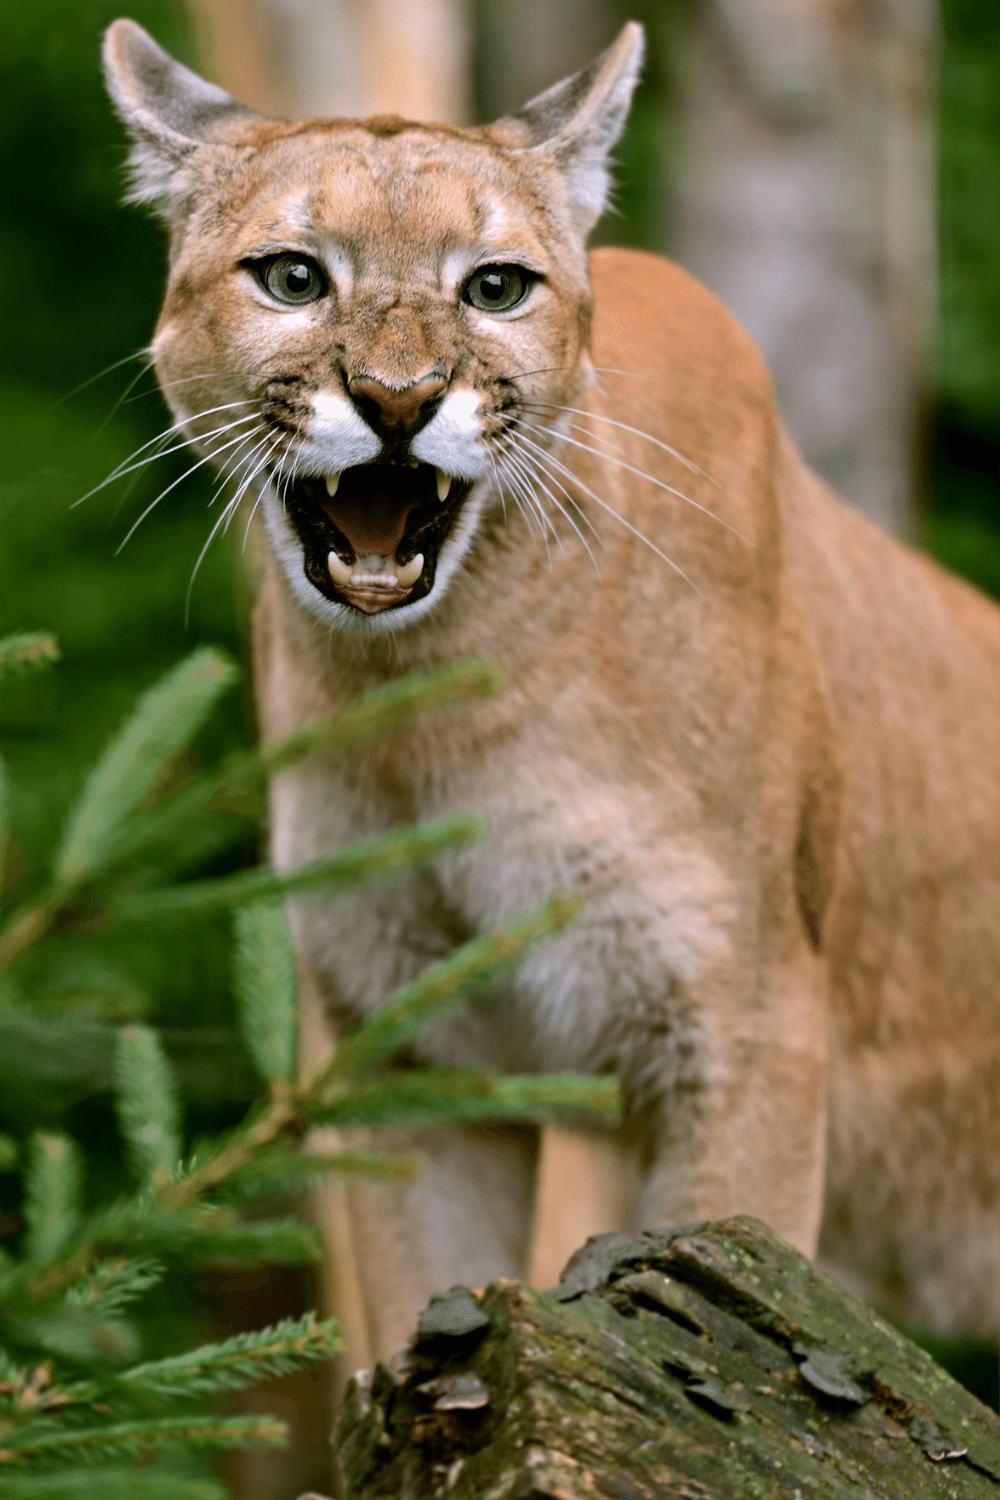 Cougar's Claws And Teeth Are About 2 Inches Long